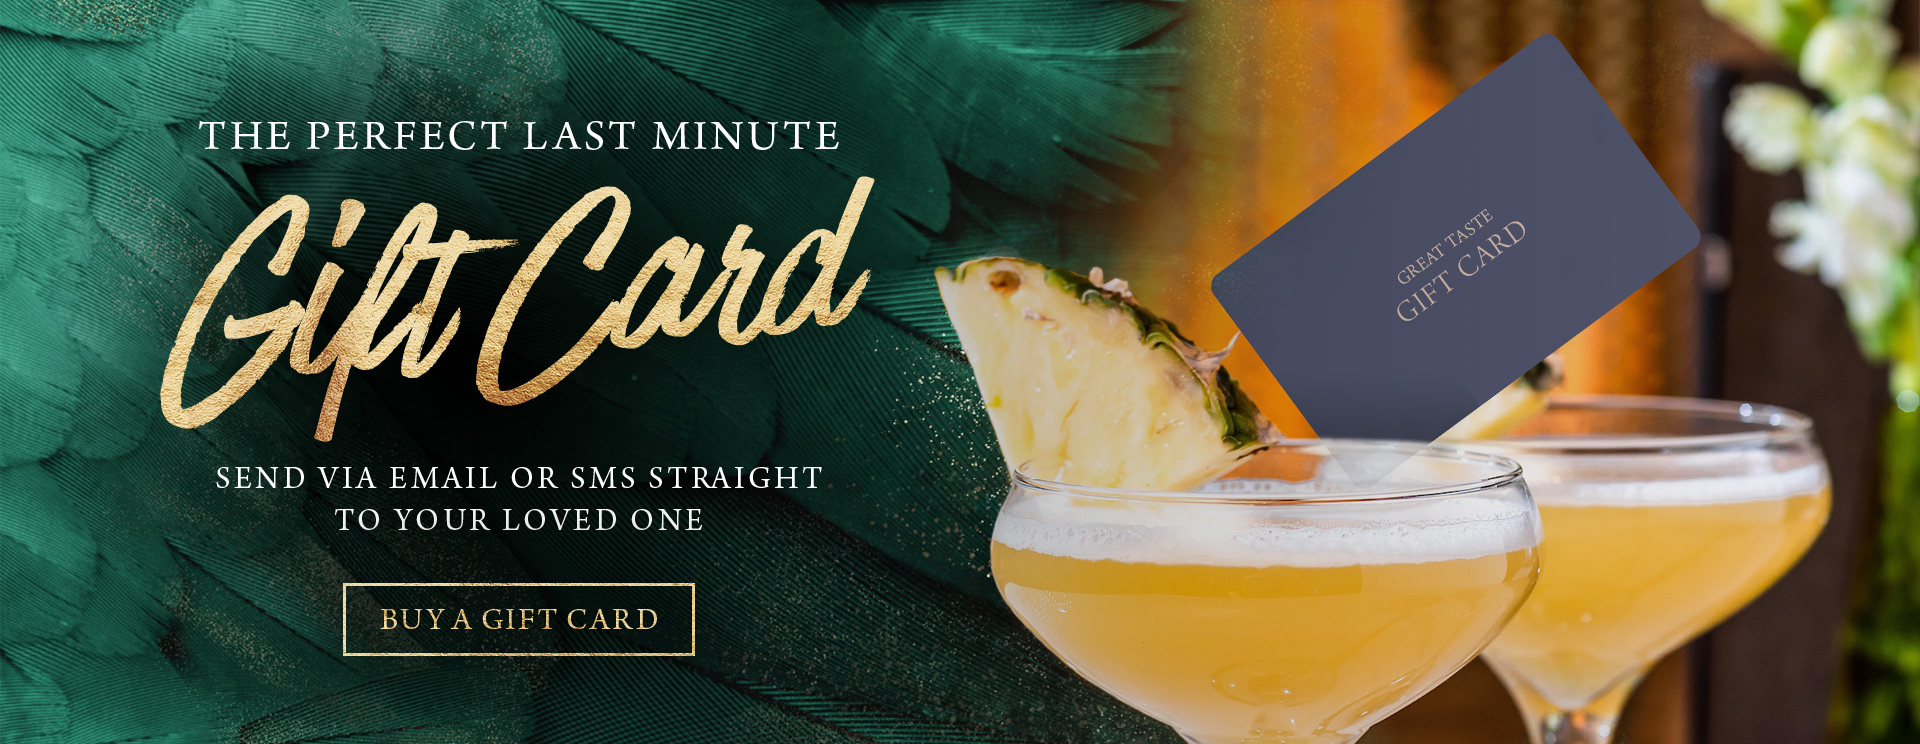 Give the gift of a gift card at The Green Man